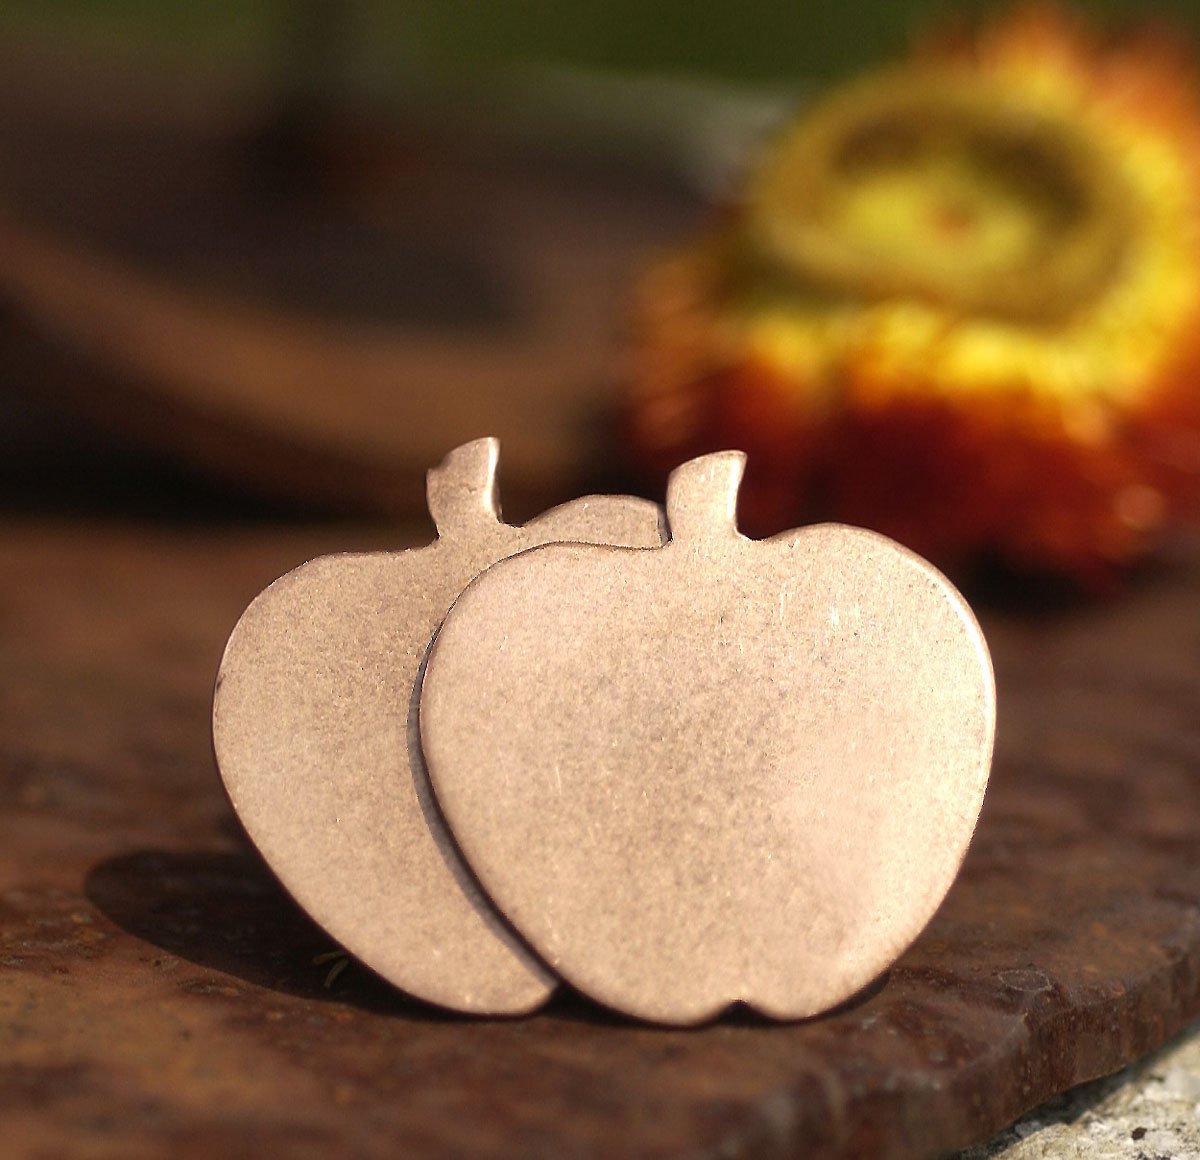 Large Apples with Stem 28mm x 30mm Shape Blank for Enameling Stamping Texturing Jewelry Making Blanks Variety of Metals